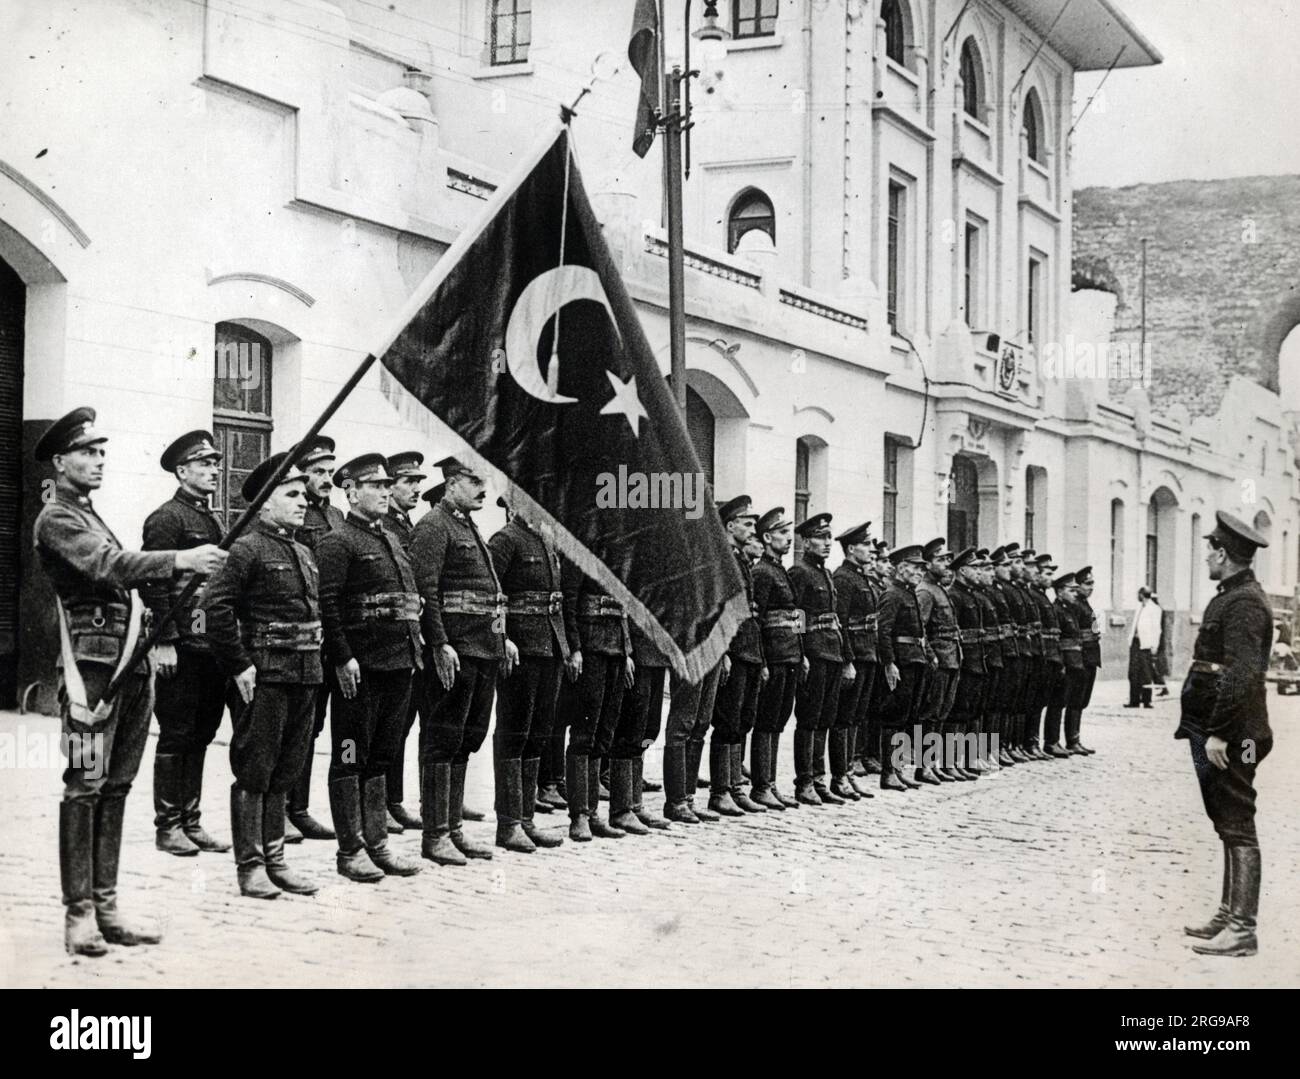 Istanbul Modern Fire Department, Turkey - Firemen lined up for inspection. Stock Photo